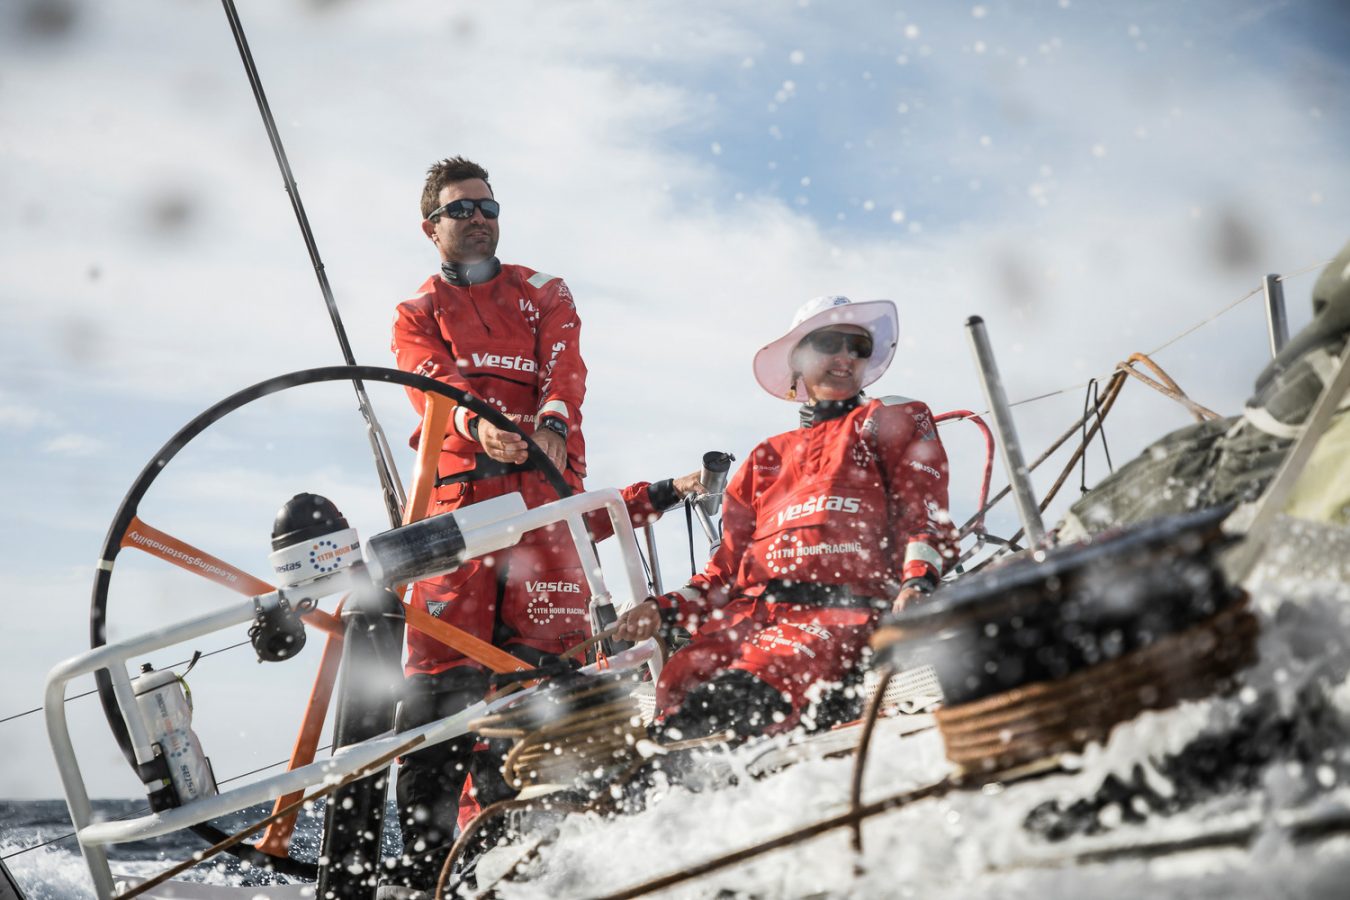 VOLVO LEG 3 PREVIEW WITH CHARLIE ENRIGHT